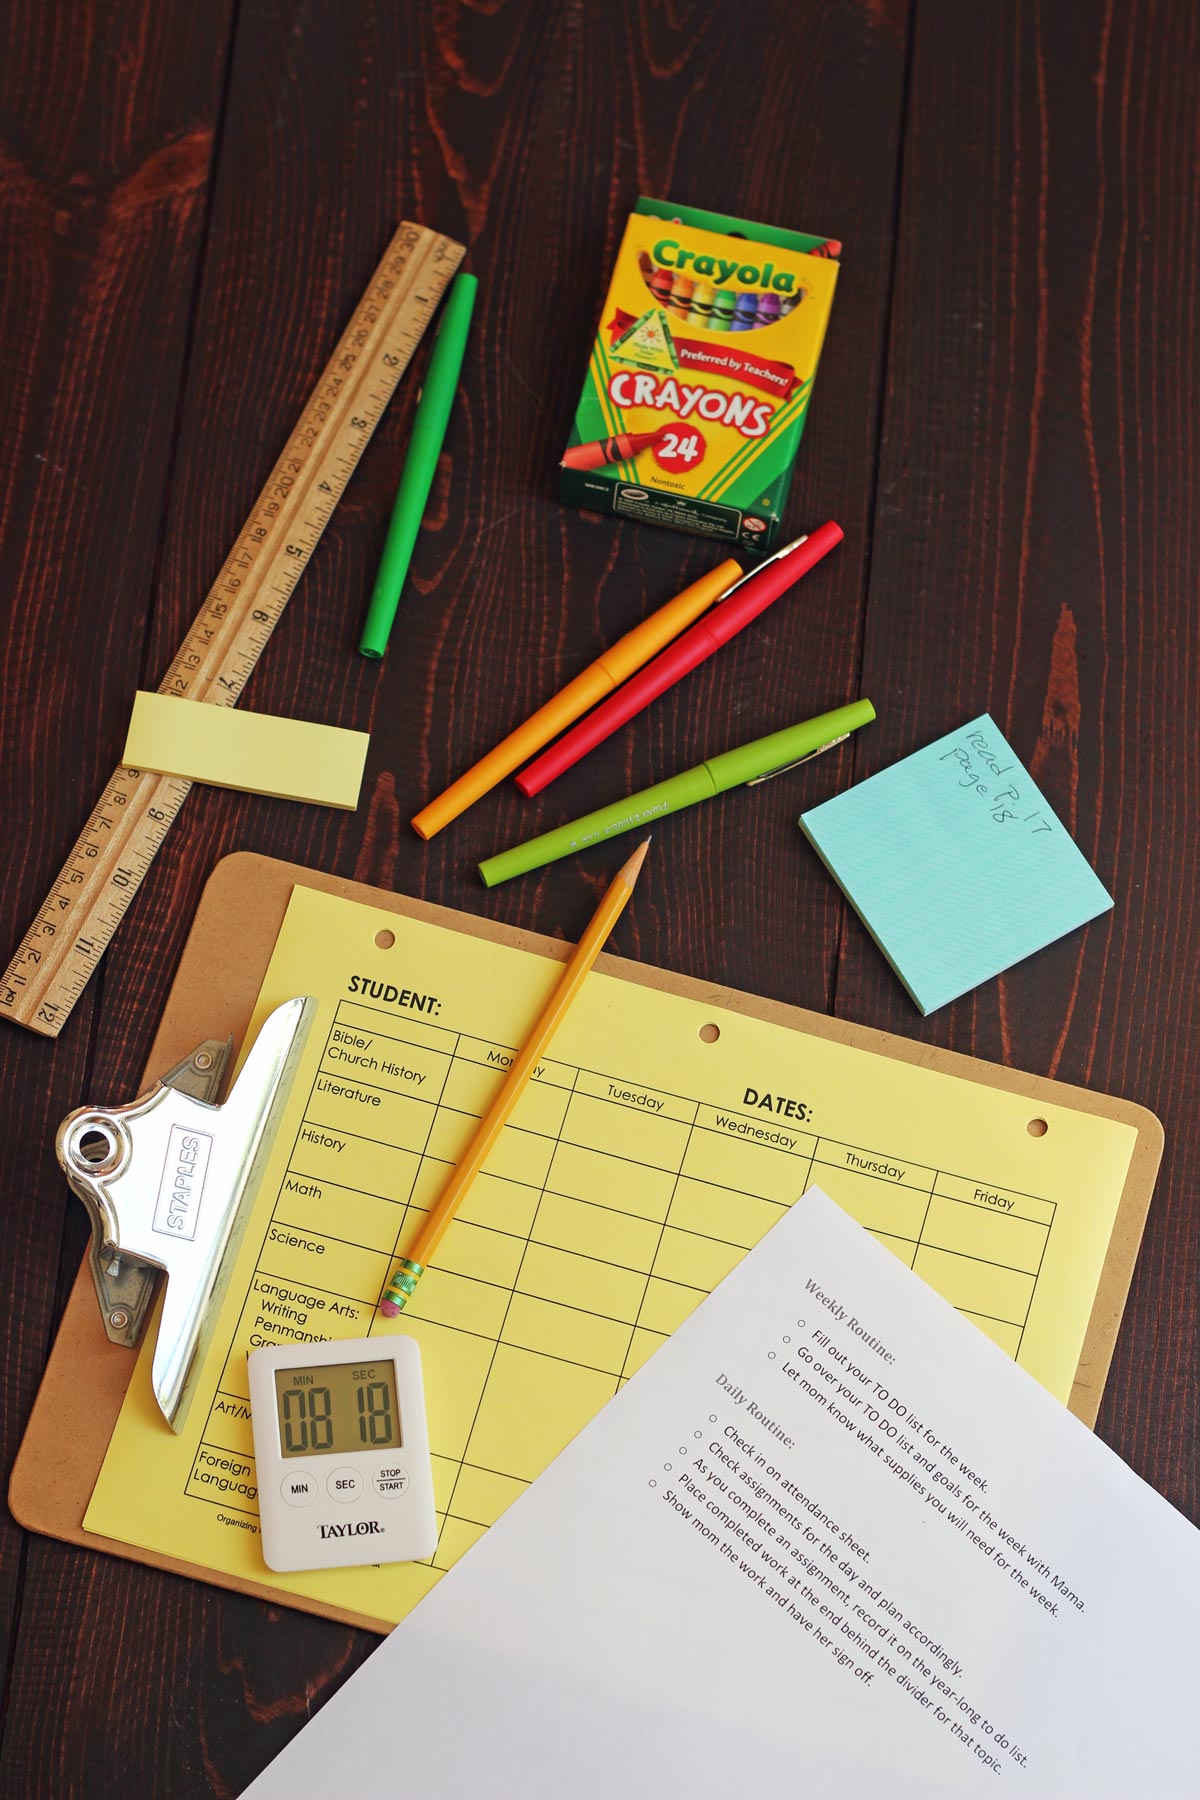 school supplies including clipboard on red wood table.